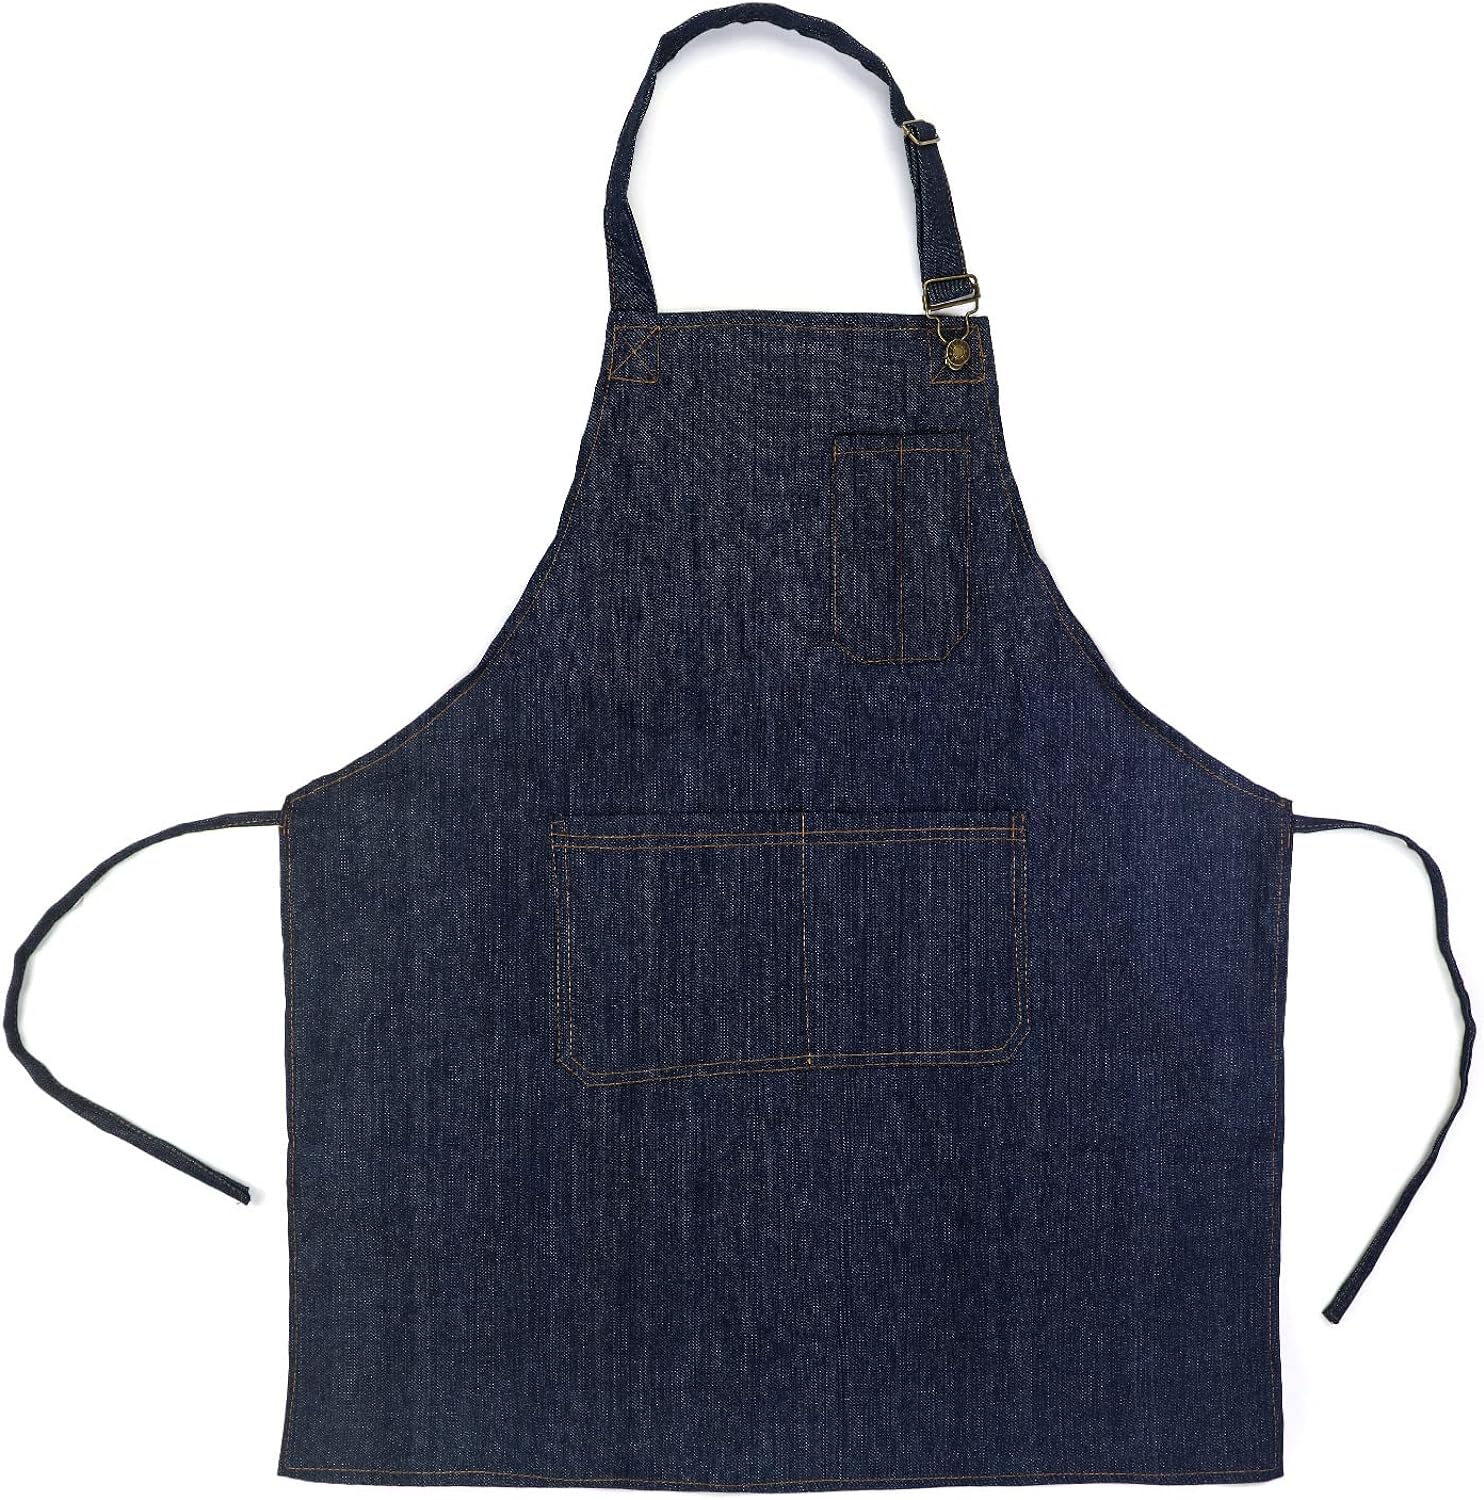 Generic QWORK Heavy Duty Denim Work Apron With Pockets, Adjustable Jean Tool Apron for Men and Women